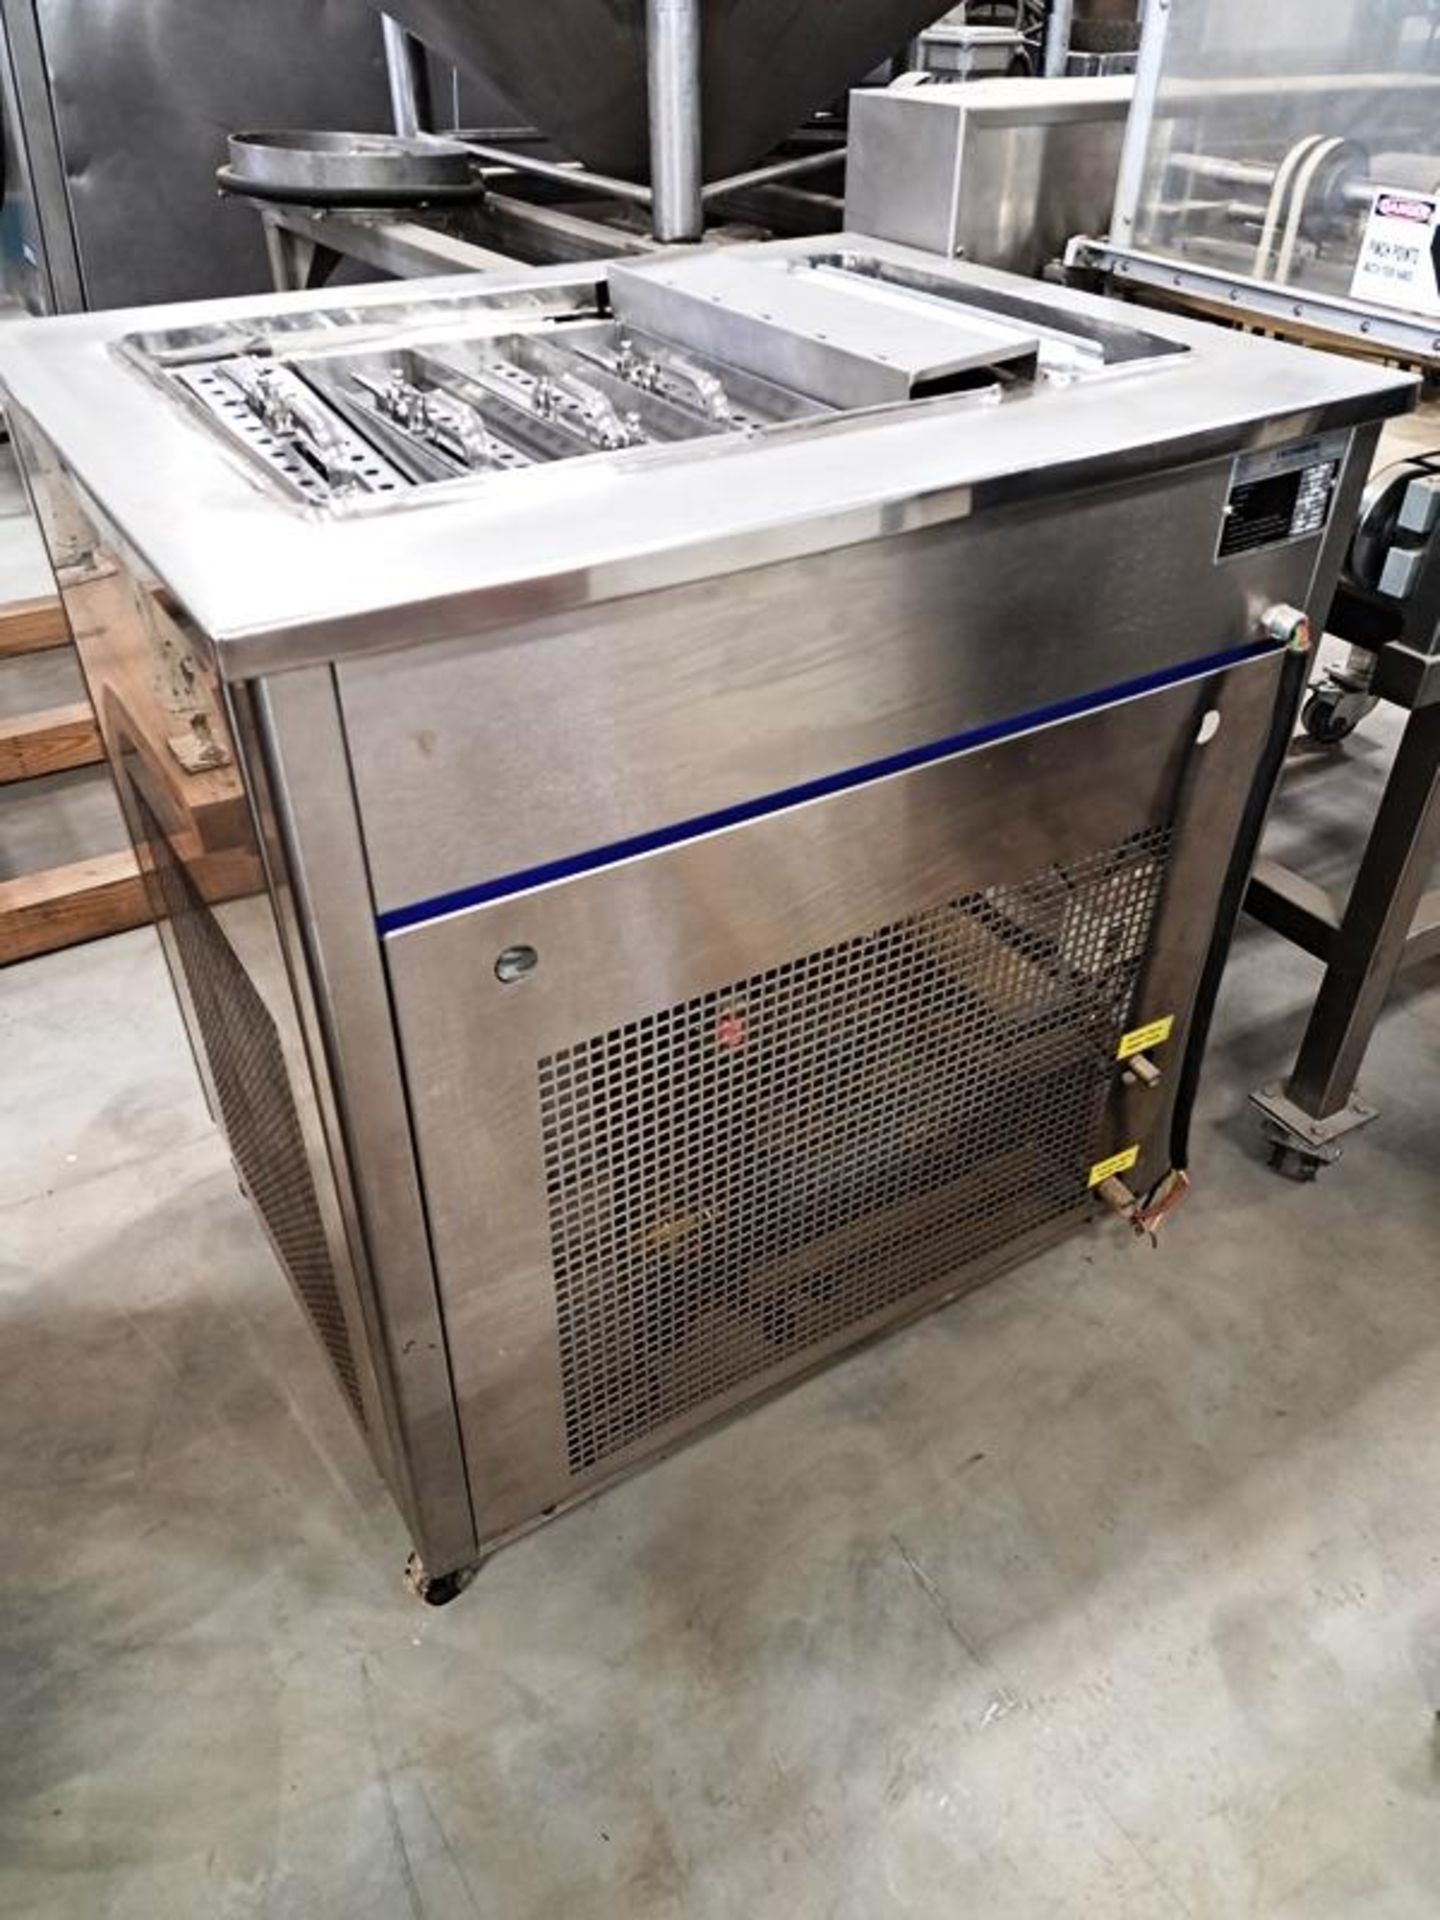 Frisher Mdl. FP300 Ice Cream Stick Maker, manual controls, digital readout, 230 volts, 3 phase ( - Image 3 of 4